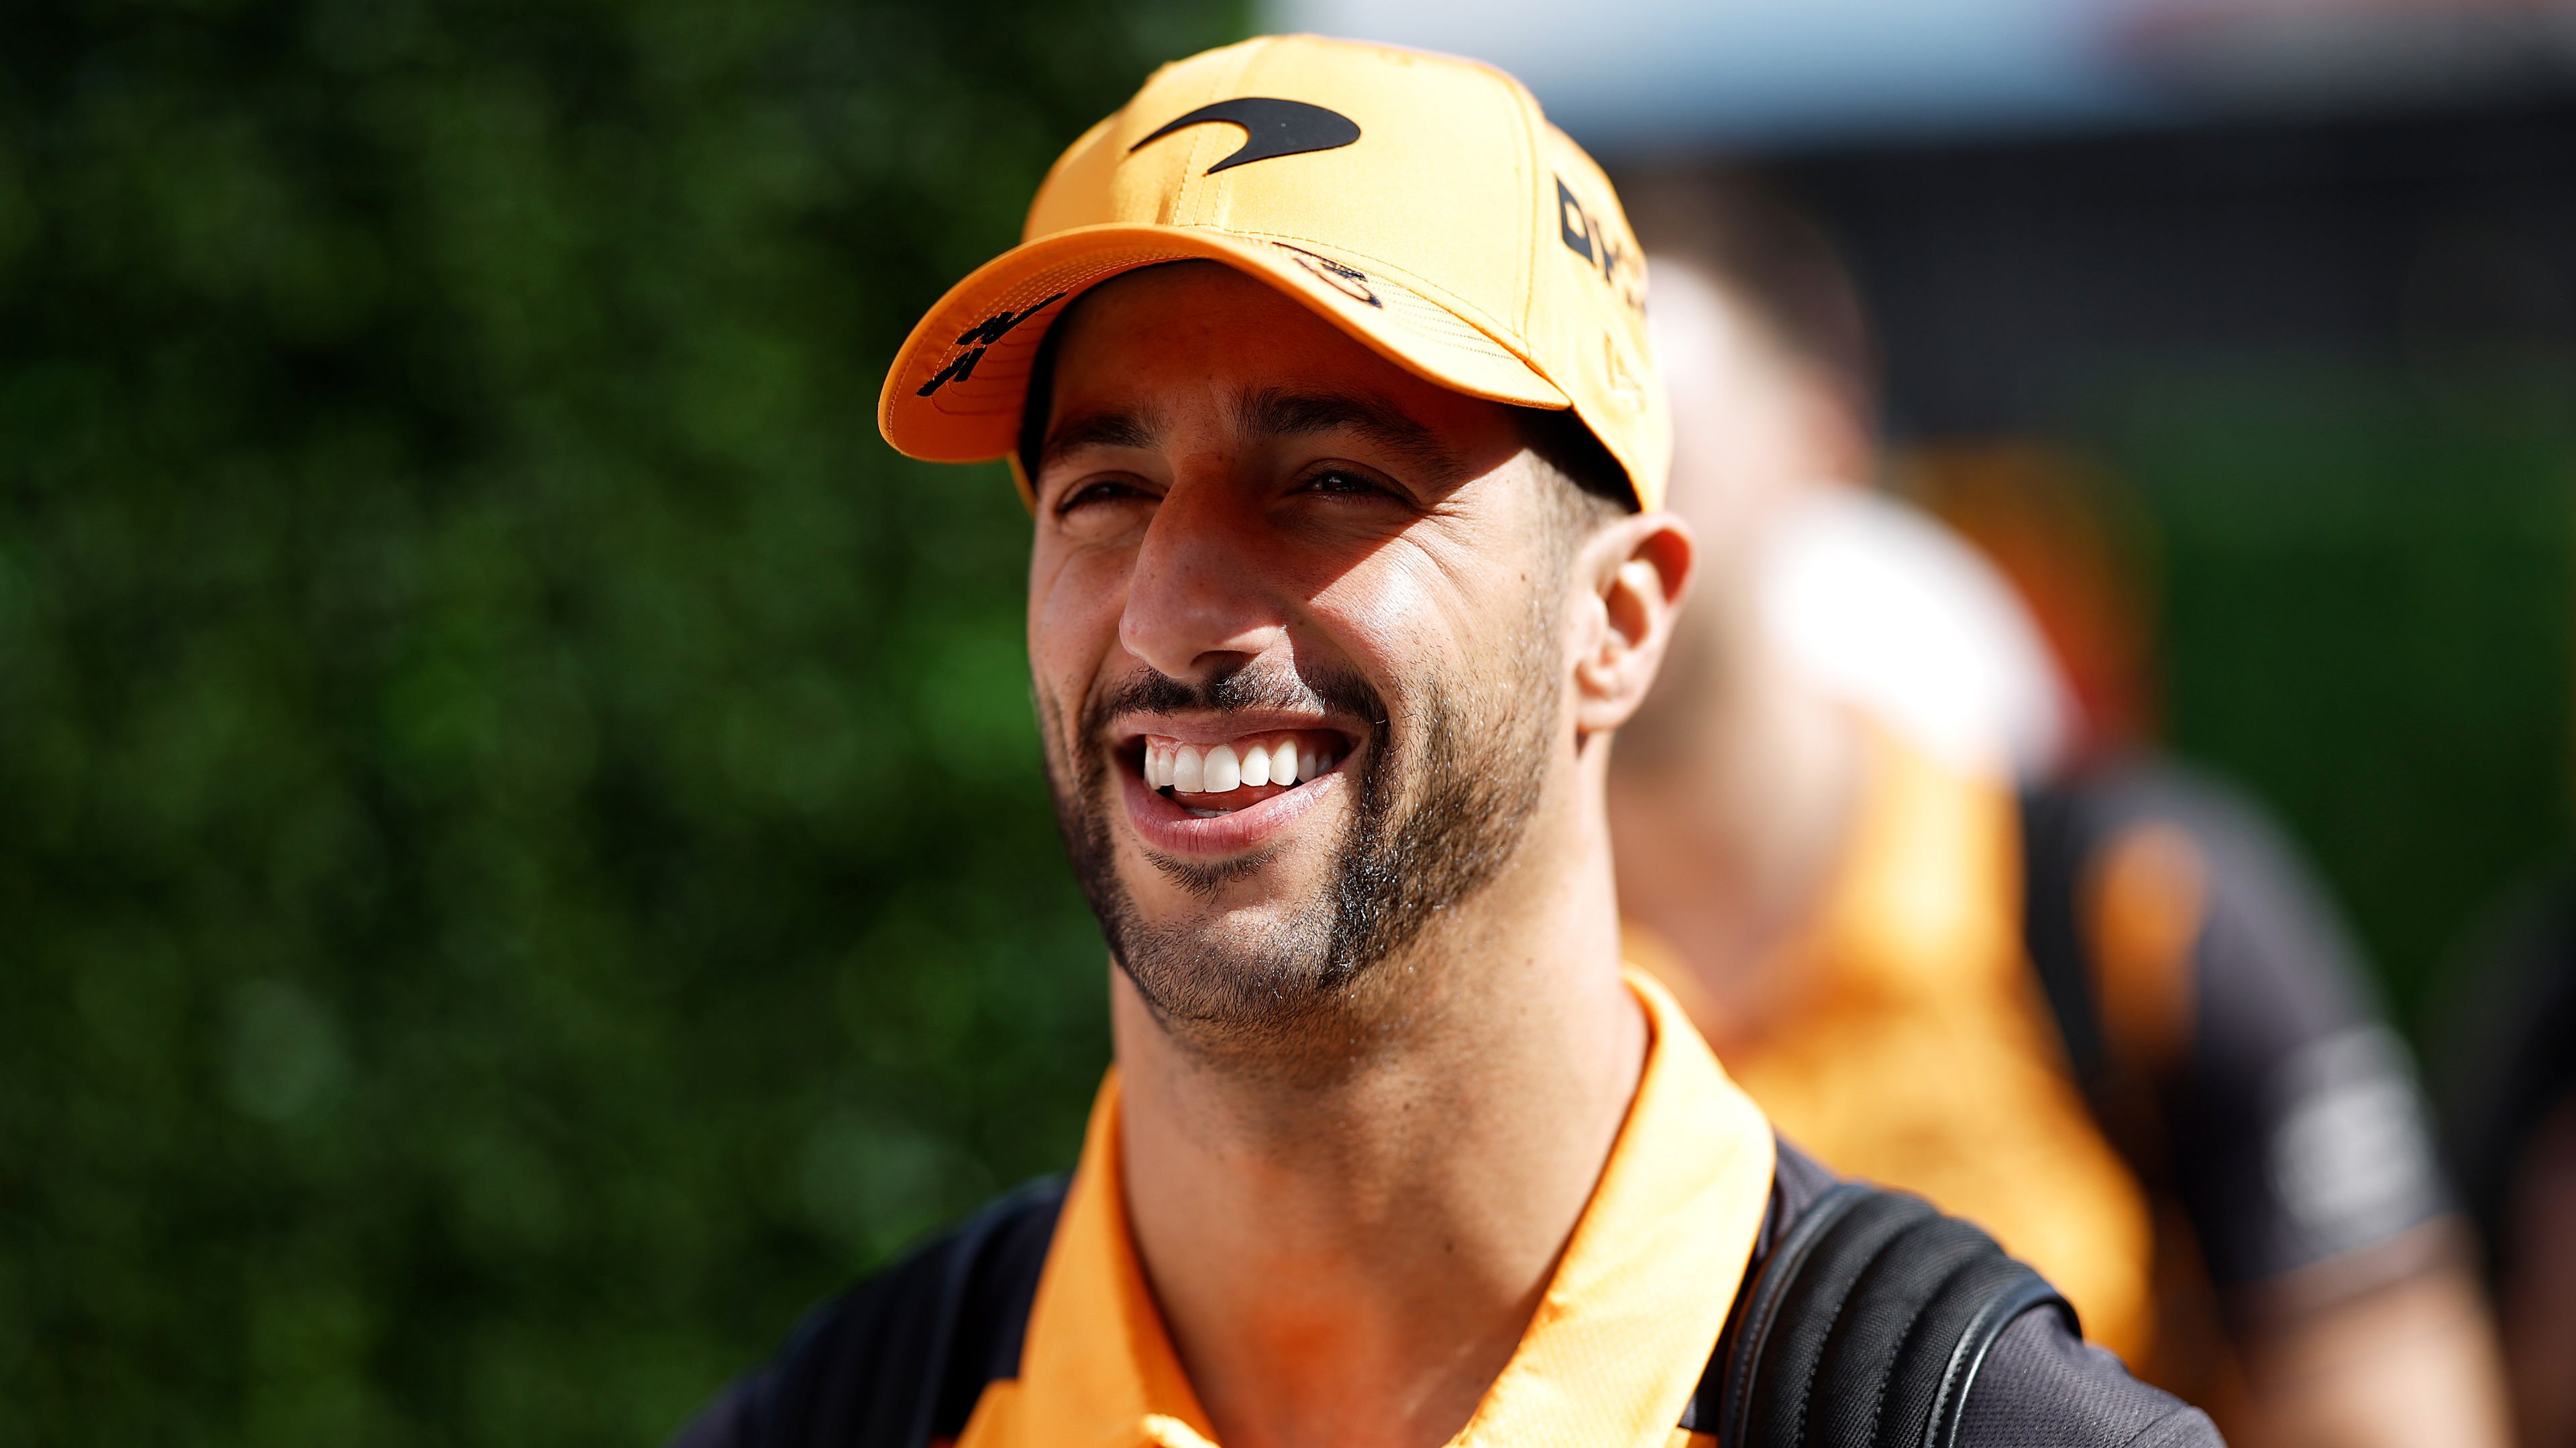 Daniel Ricciardo of Australia and McLaren walks in the Paddock prior to final practice ahead of the F1 Grand Prix of USA at Circuit of The Americas on October 22, 2022 in Austin, Texas. (Photo by Chris Graythen/Getty Images)